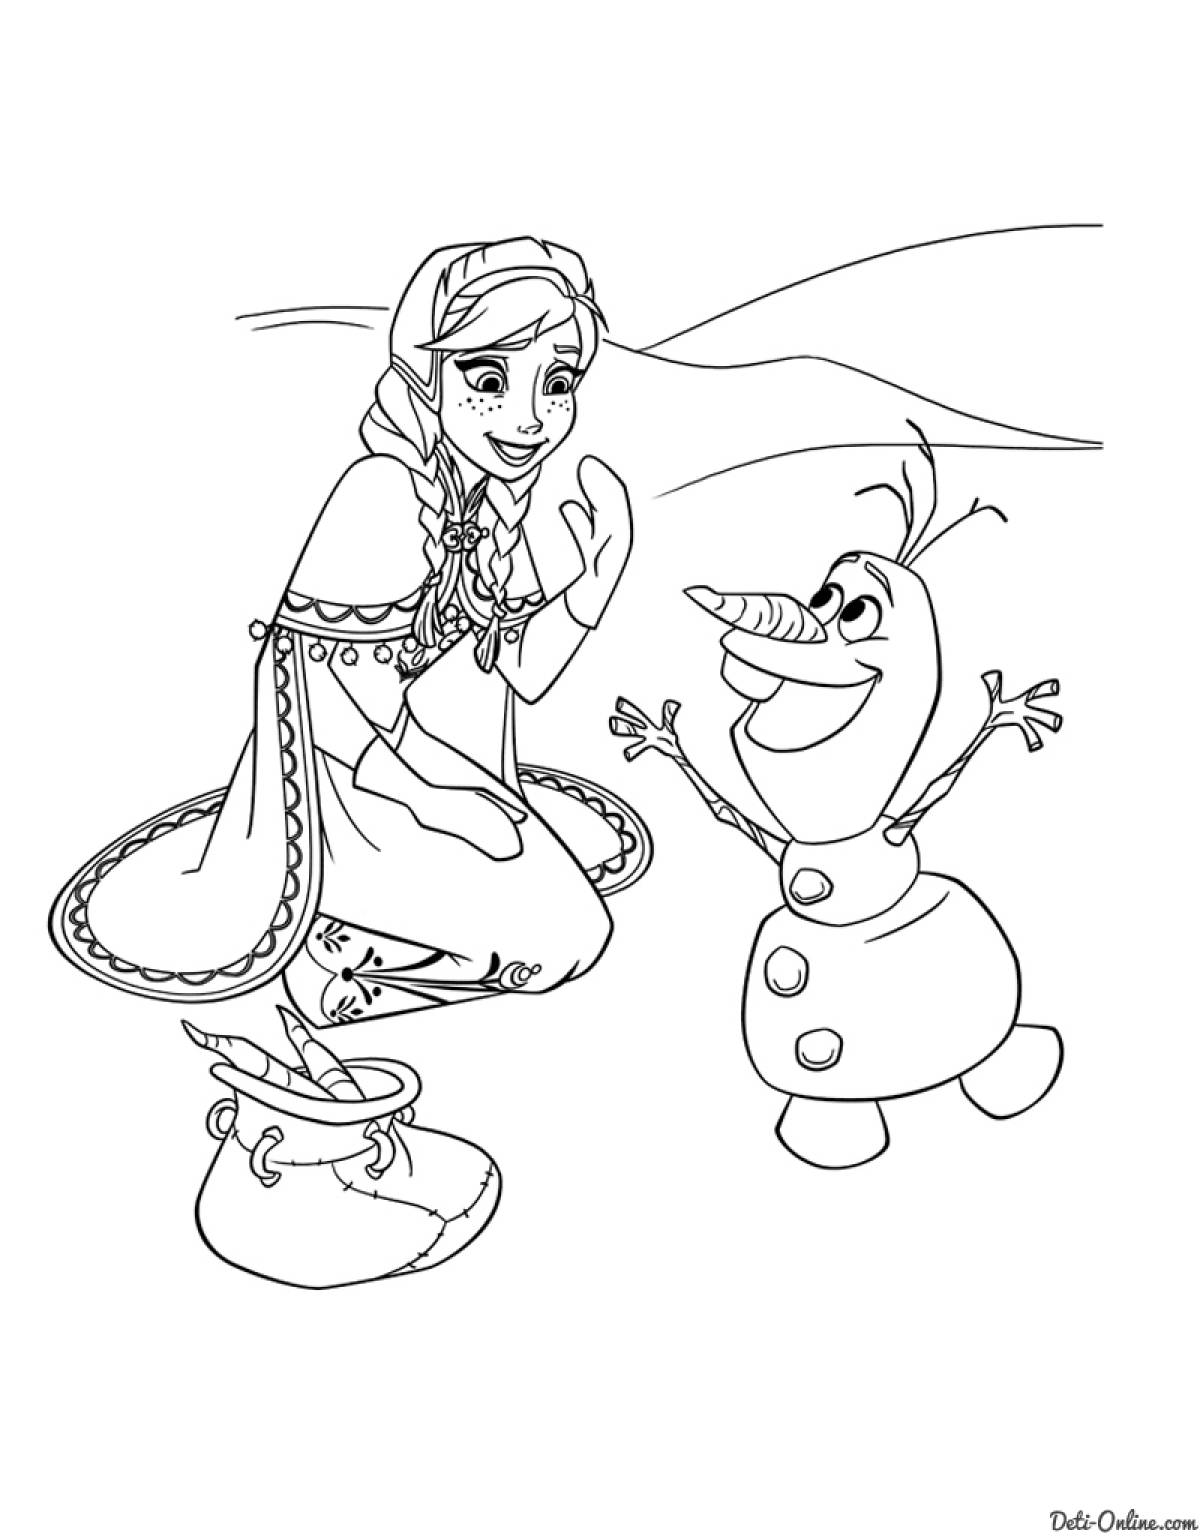 Frozen snowman and anna coloring page